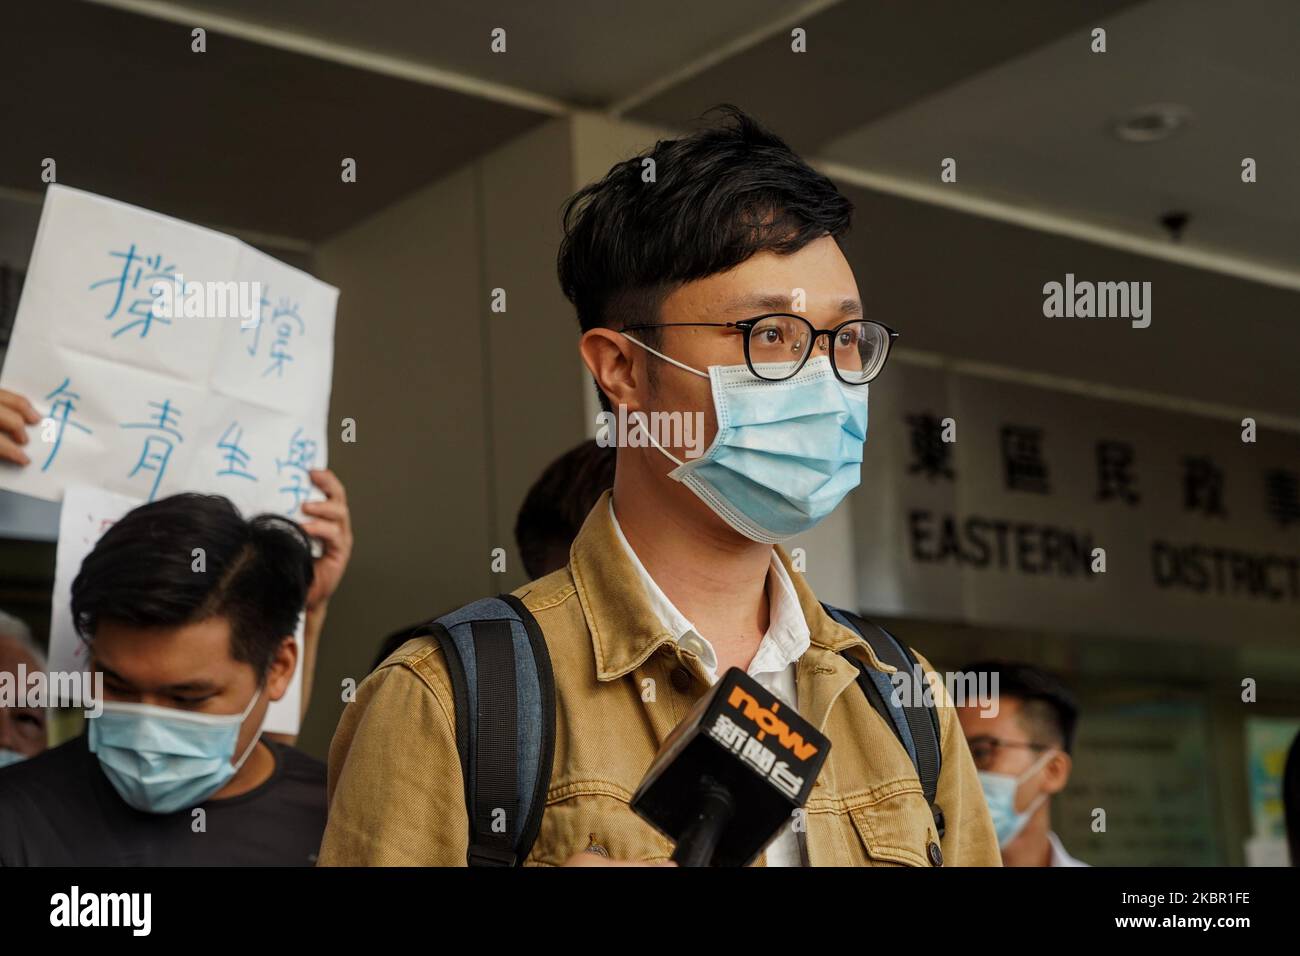 Pro-democracy activist, Ventus Lau Wing-Hong appeared at the Courts on 10 June 2020 in Hong Kong, China. He faces an additional charge of rioting on top of a court of entering Legislative Council chamber illegally on 1 July 2019. (Photo by Yat Kai Yeung/NurPhoto) Stock Photo